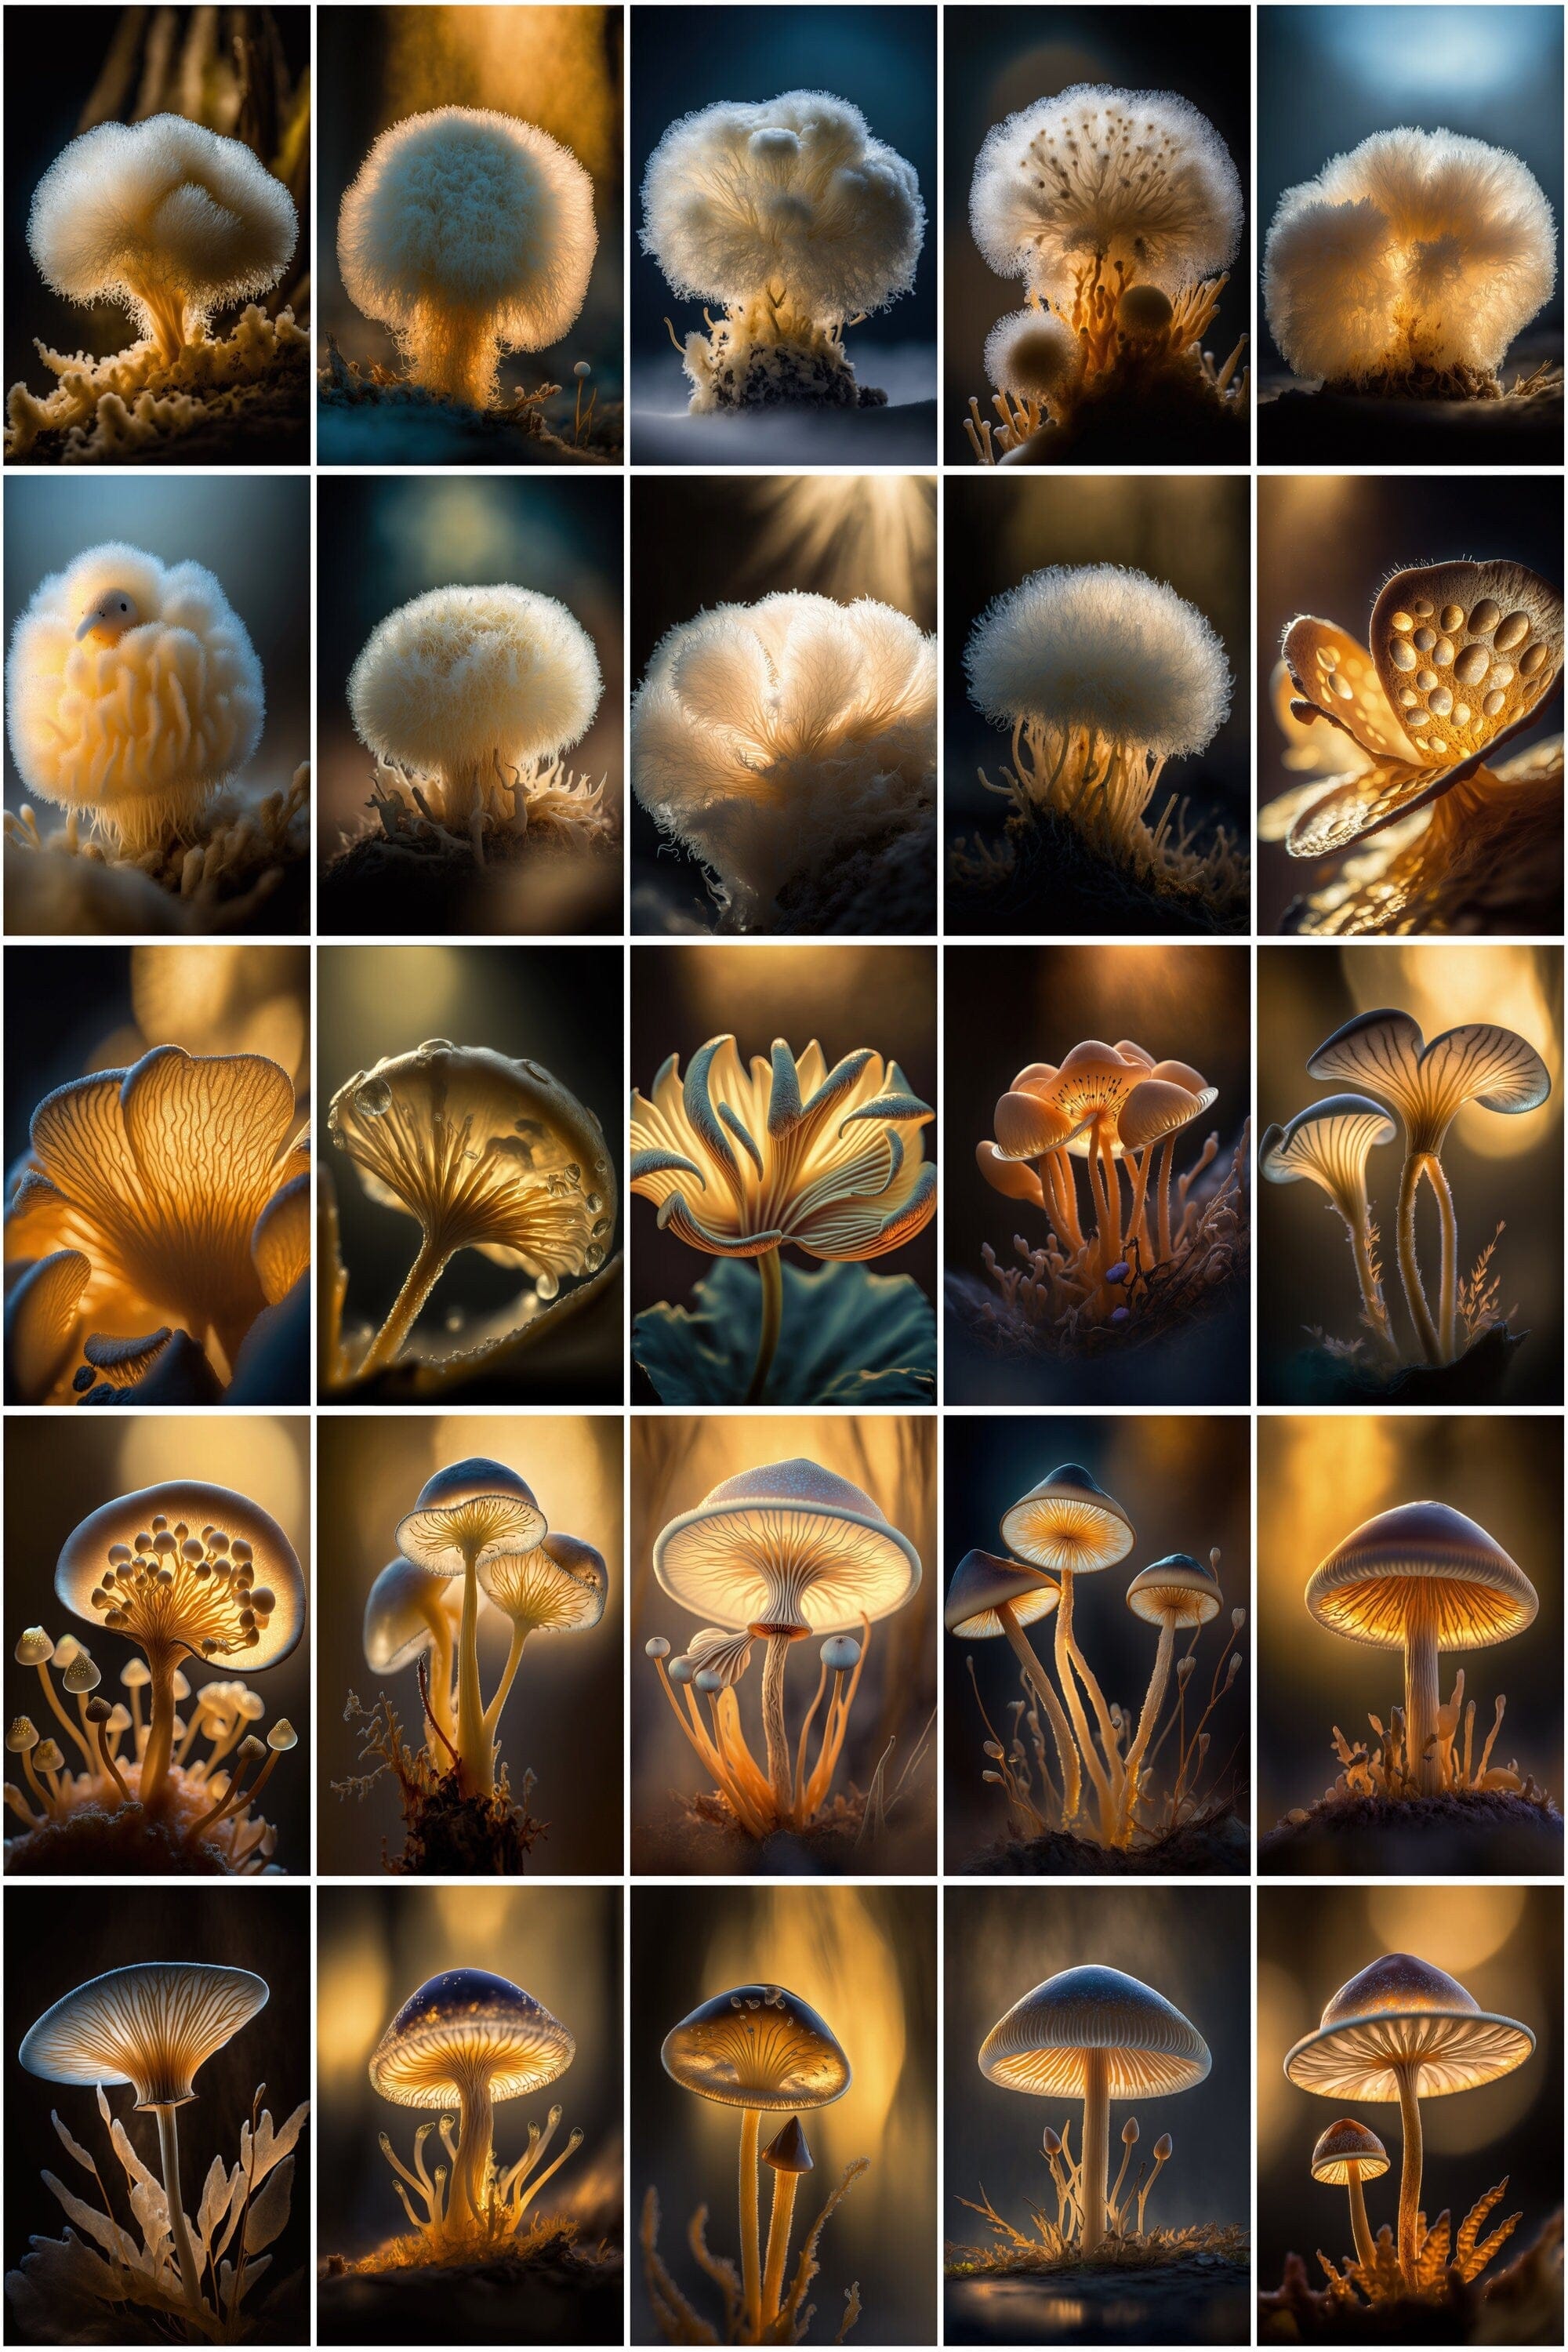 320 High-Quality Images of Mushroom Species - Perfect for Nature Lovers and Researchers! Digital Download Sumobundle